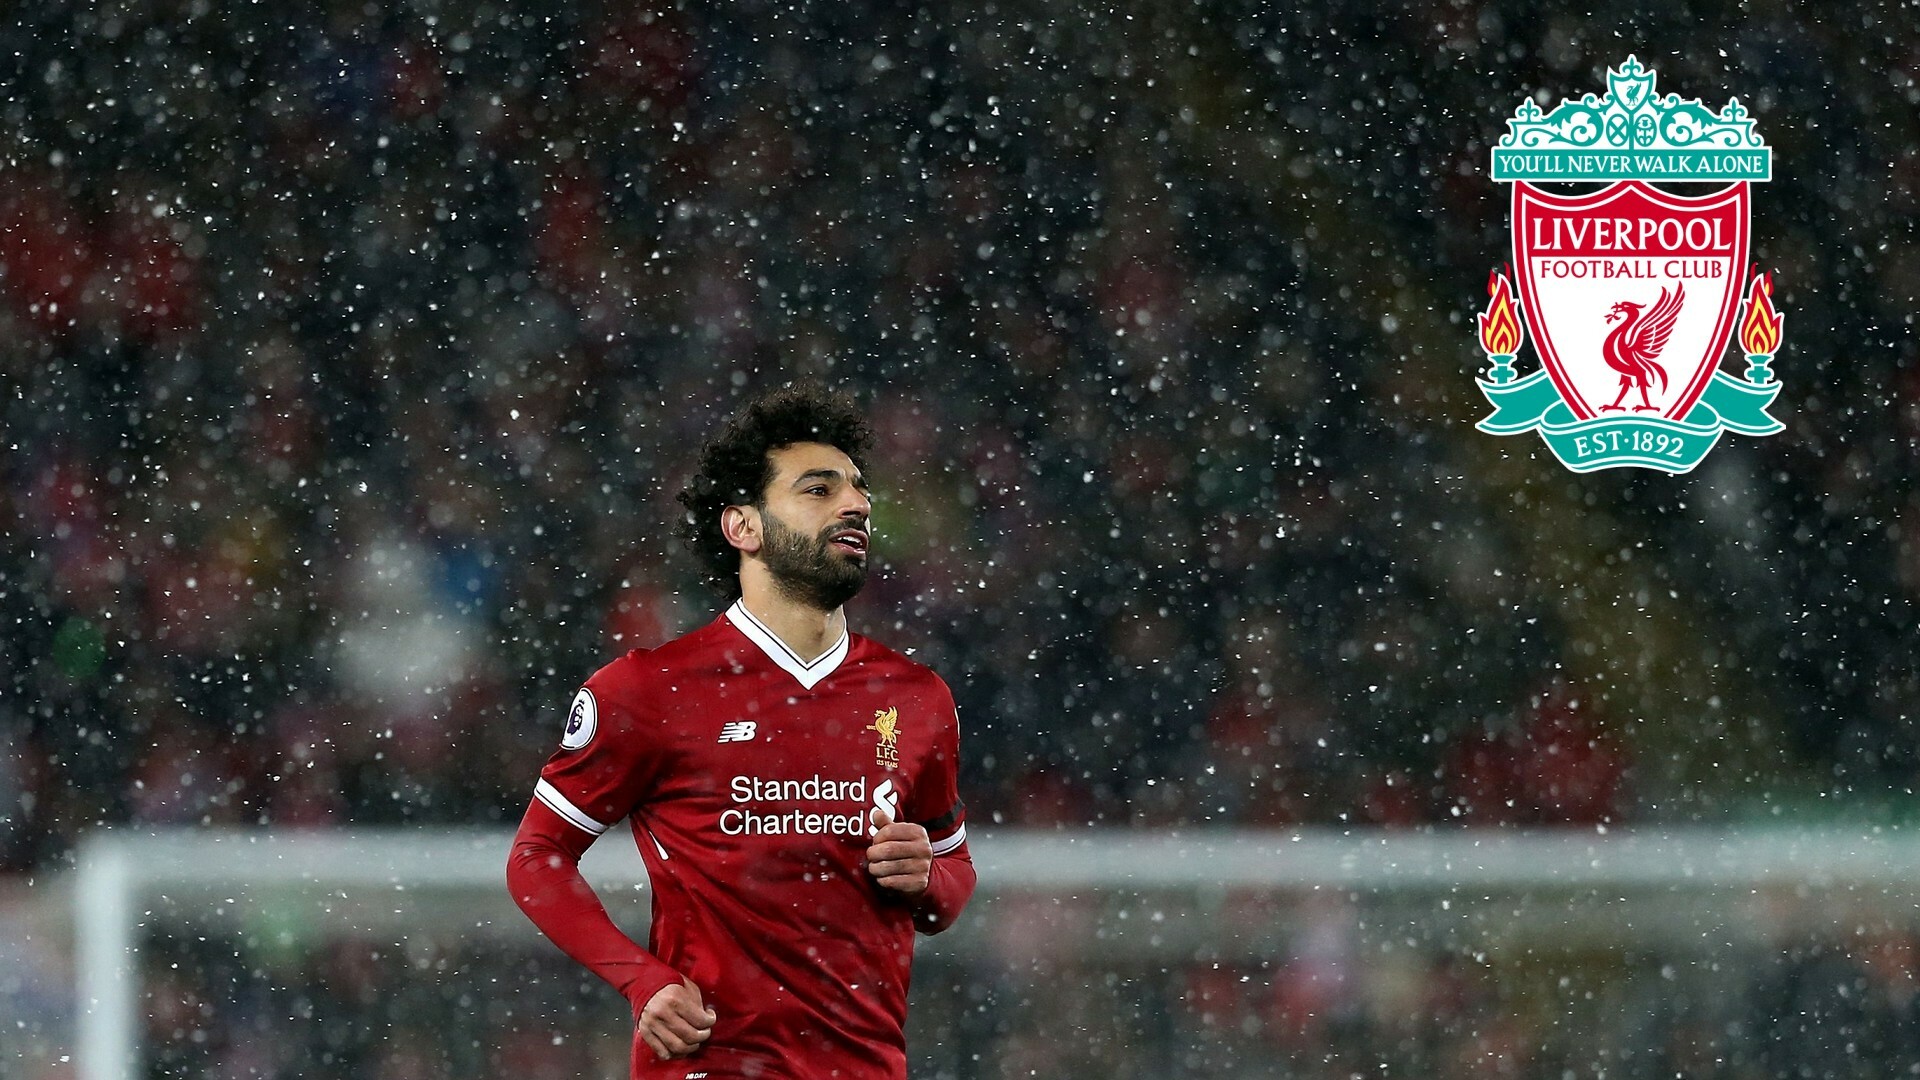 Mohamed Salah: One of the world's best and most prolific forwards and a serial champion with Liverpool. 1920x1080 Full HD Wallpaper.